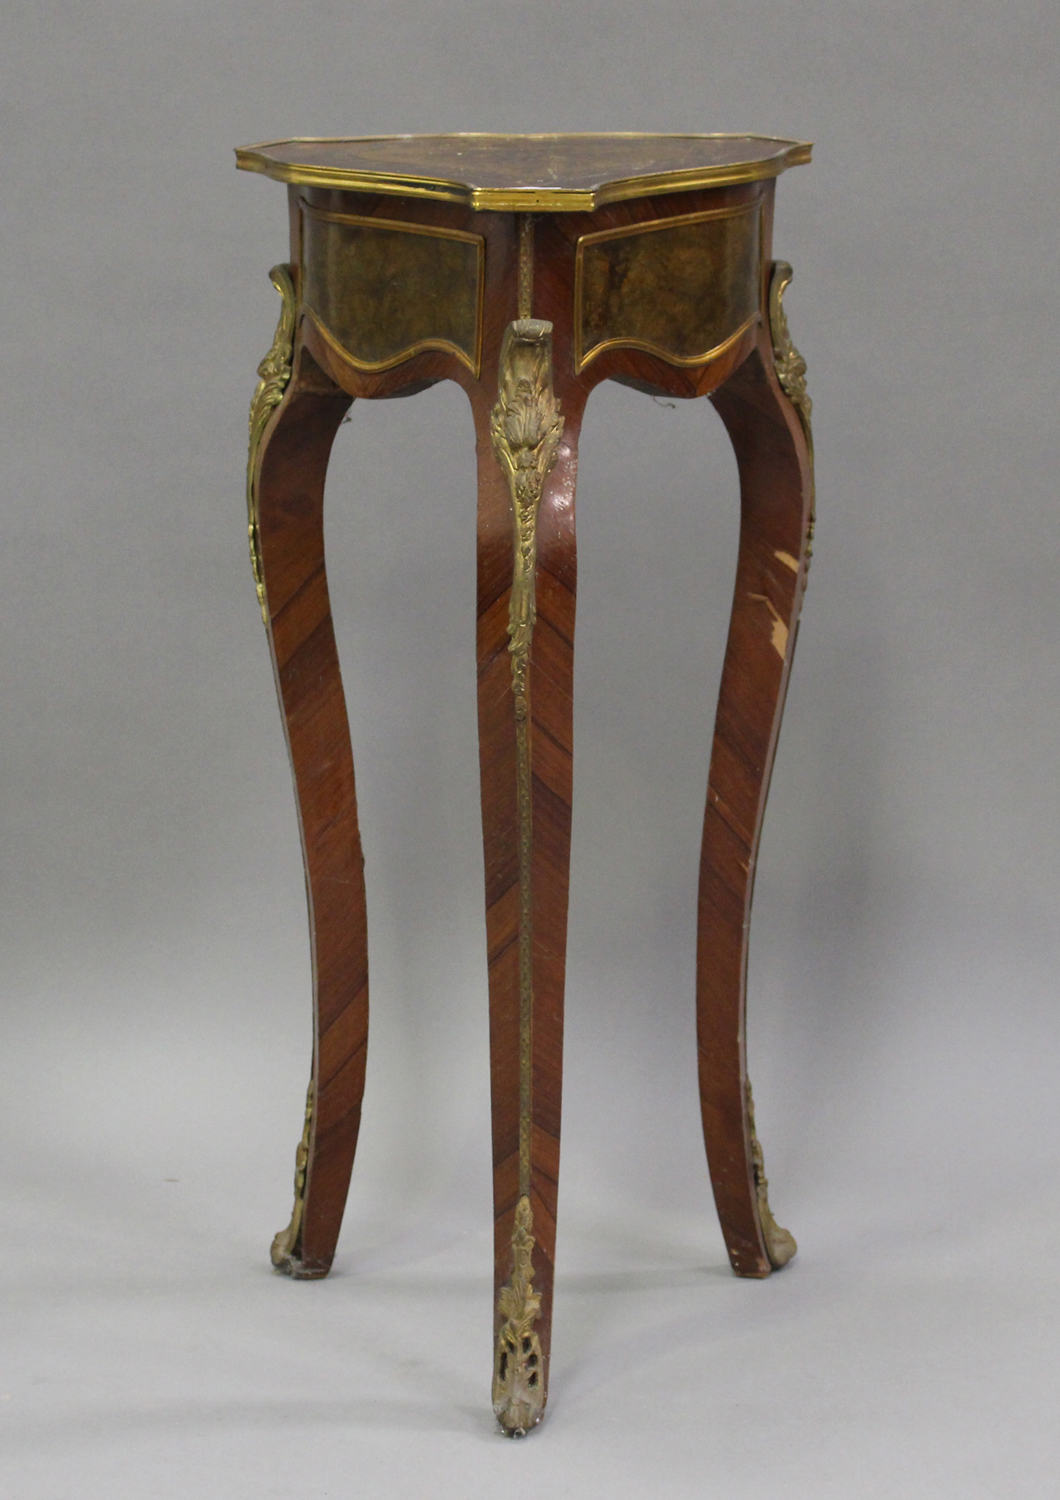 A 20th century Louis XVI style kingwood jardinière stand with gilt metal mounts, the floral